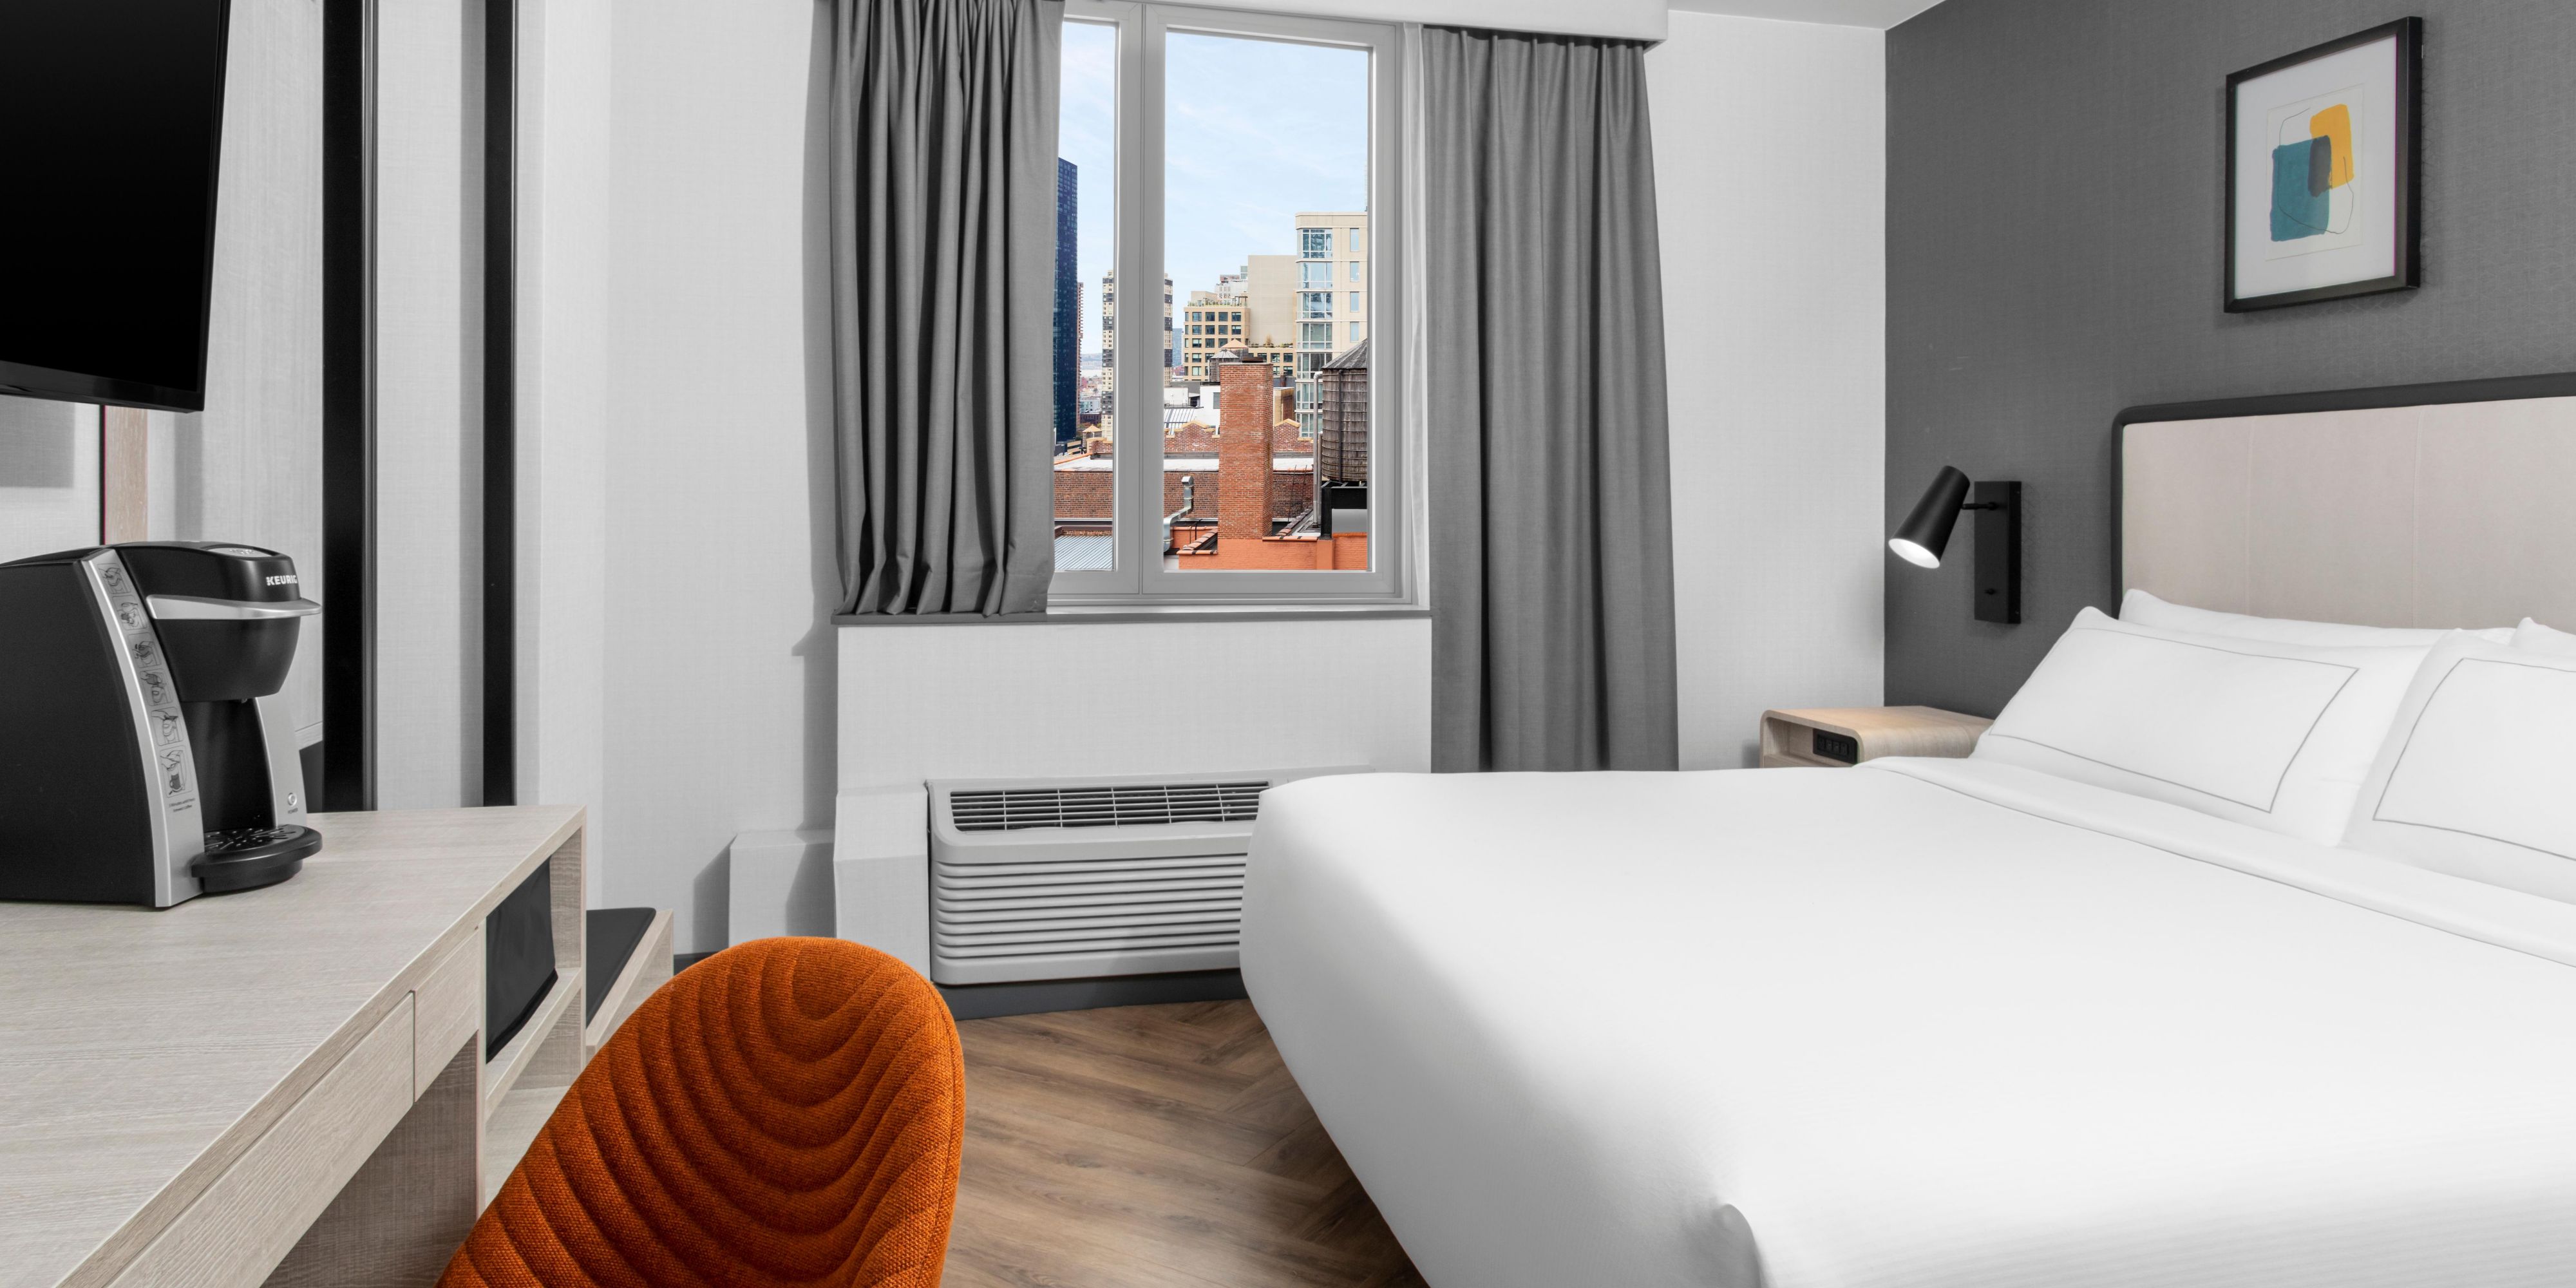 Make yourself at home in our guest rooms with a view of New York.